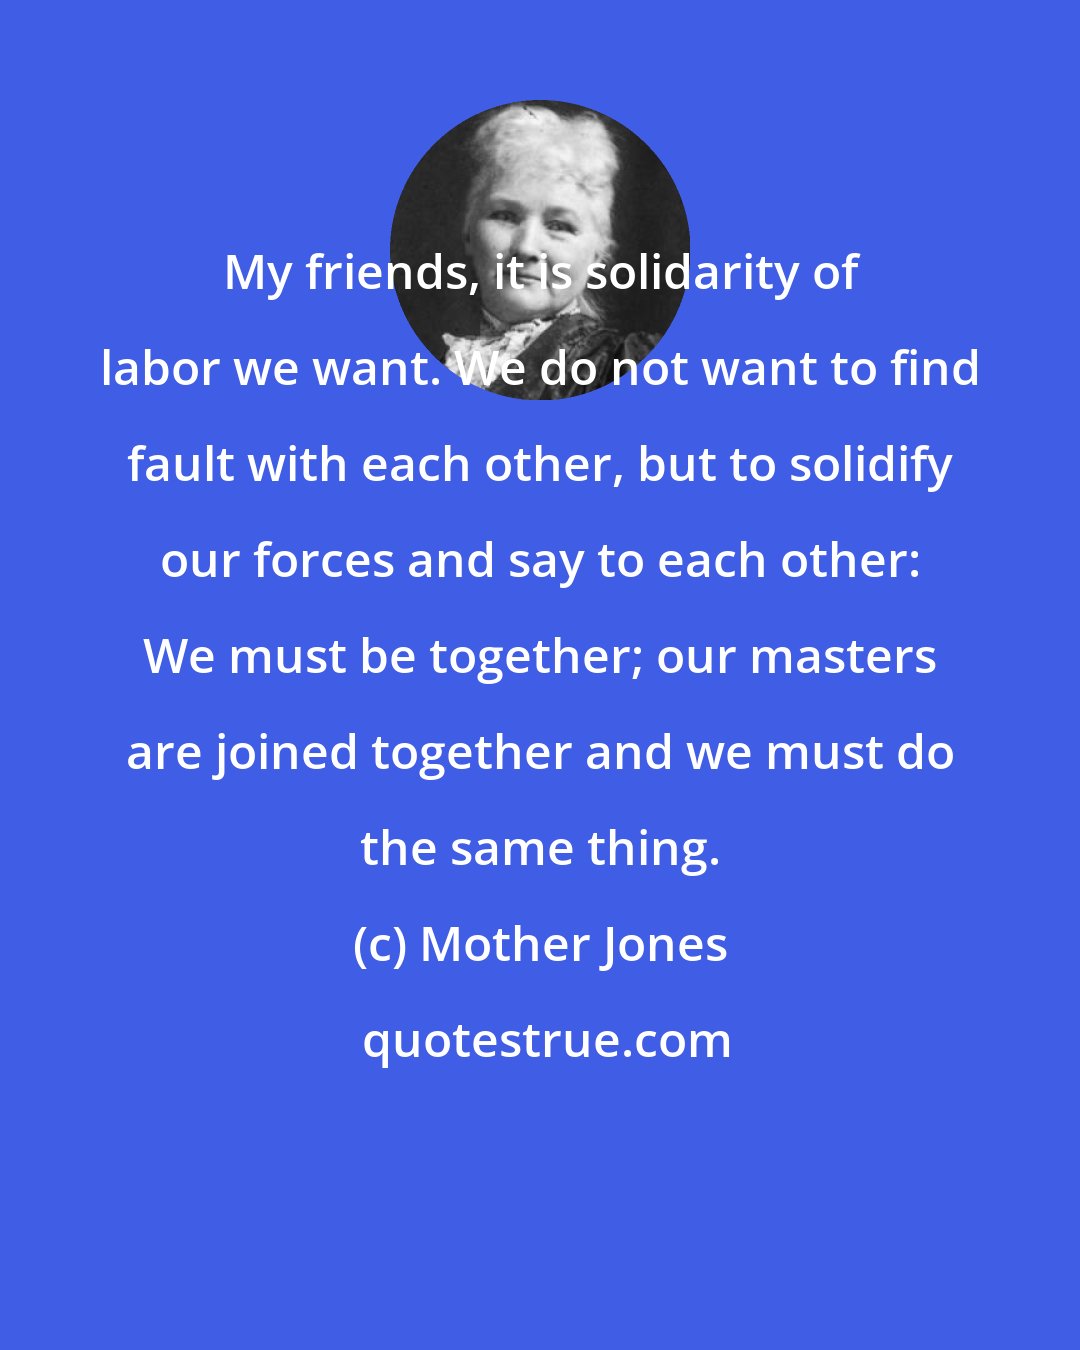 Mother Jones: My friends, it is solidarity of labor we want. We do not want to find fault with each other, but to solidify our forces and say to each other: We must be together; our masters are joined together and we must do the same thing.